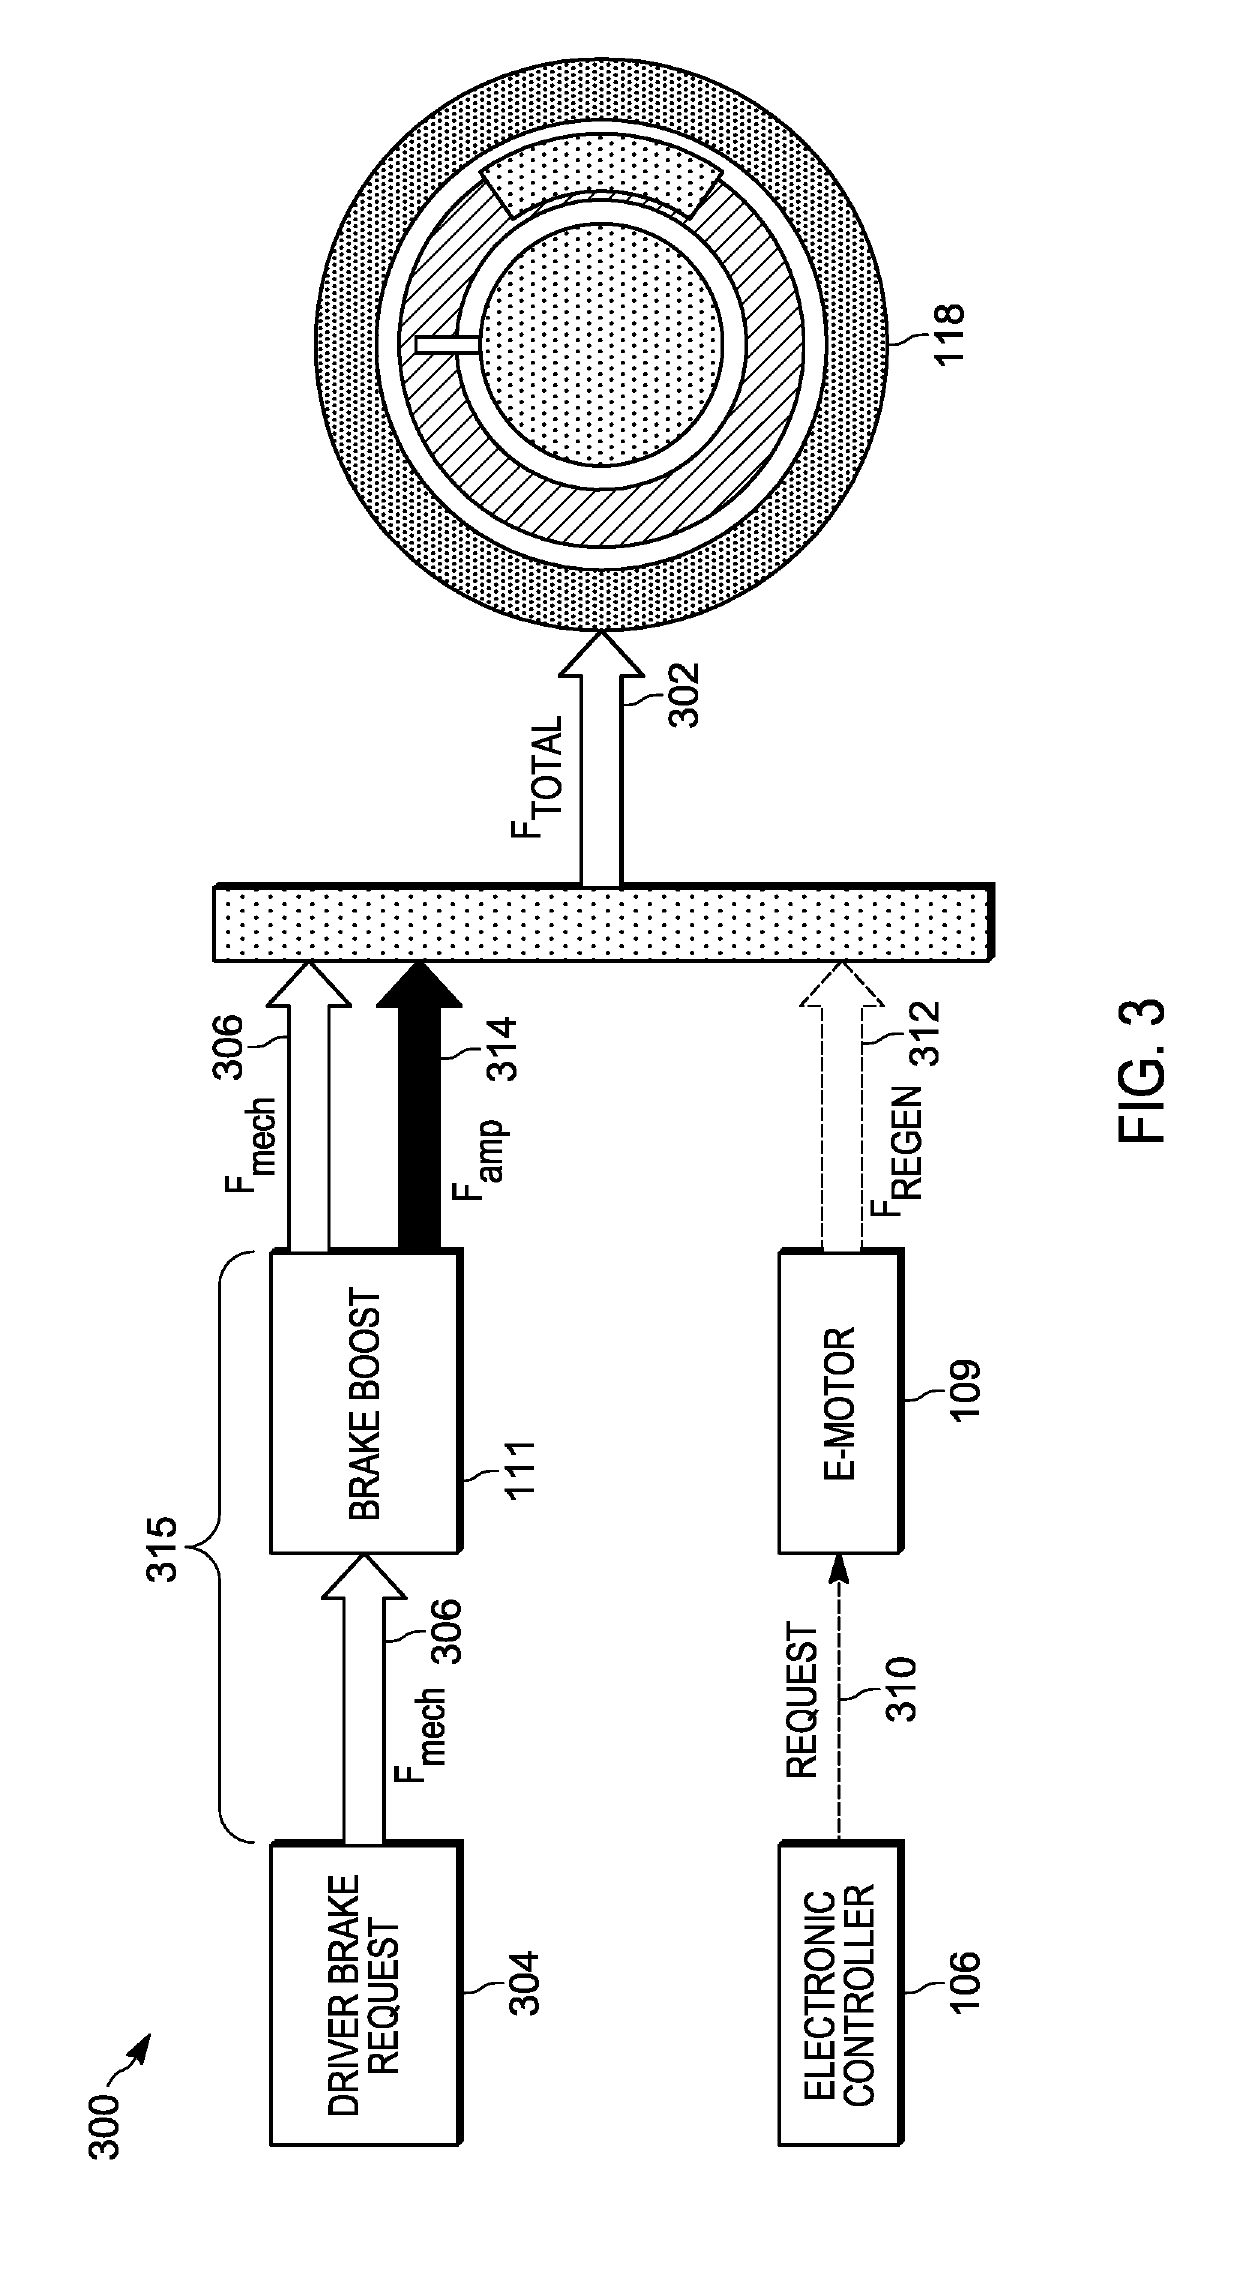 System and method for motor brake boost function failure